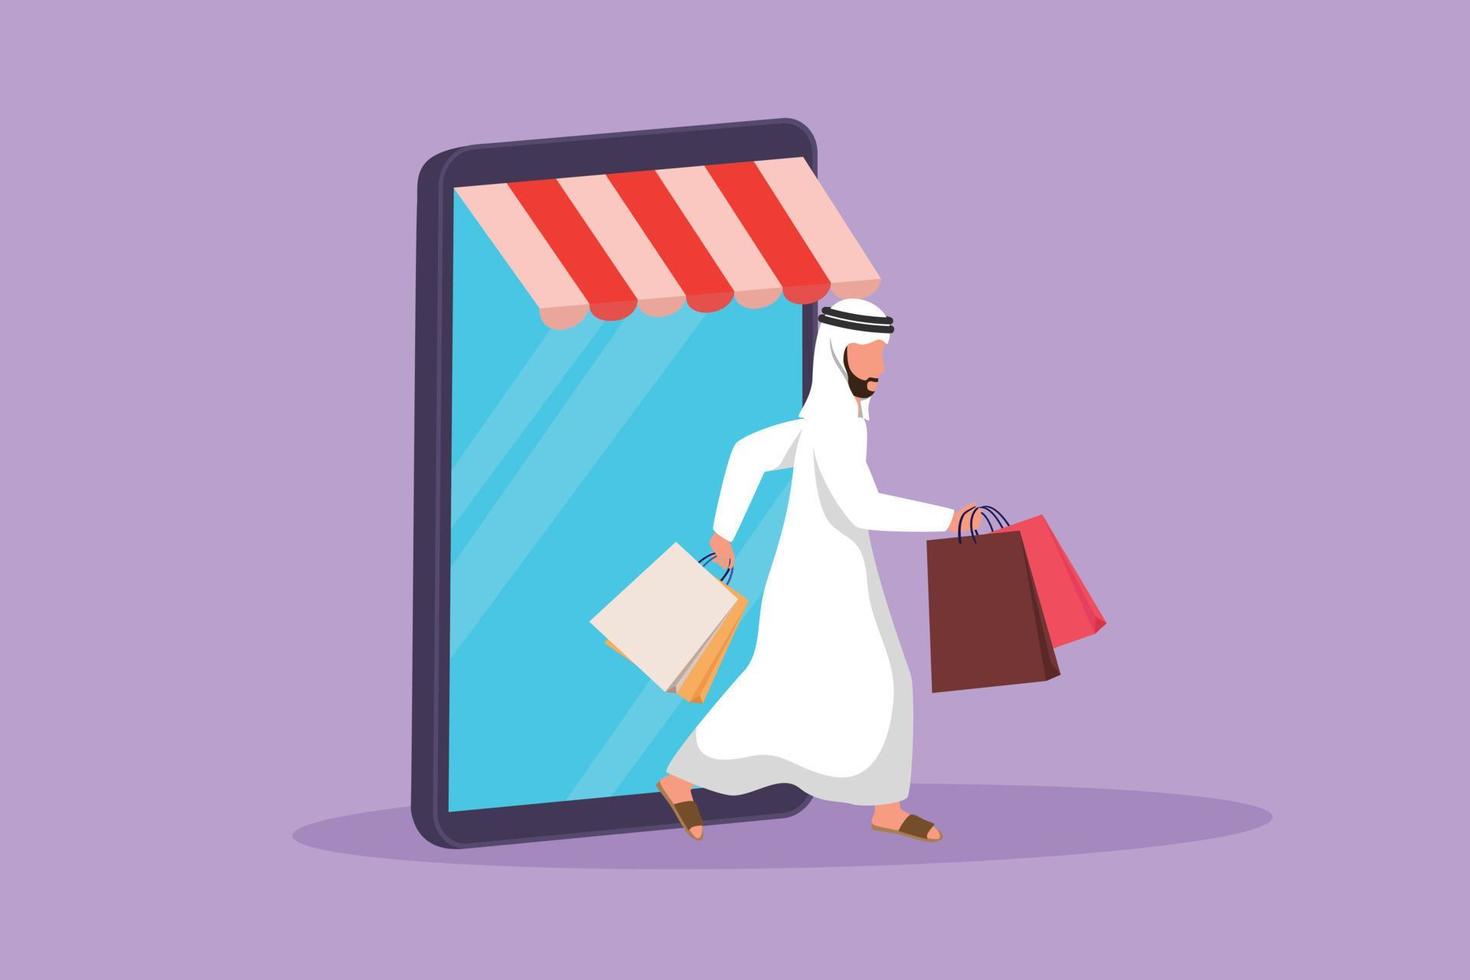 Cartoon flat style drawing Arab man coming out of canopy smartphone screen holding shopping bag. Digital lifestyle and consumerism concept. Online store technology. Graphic design vector illustration